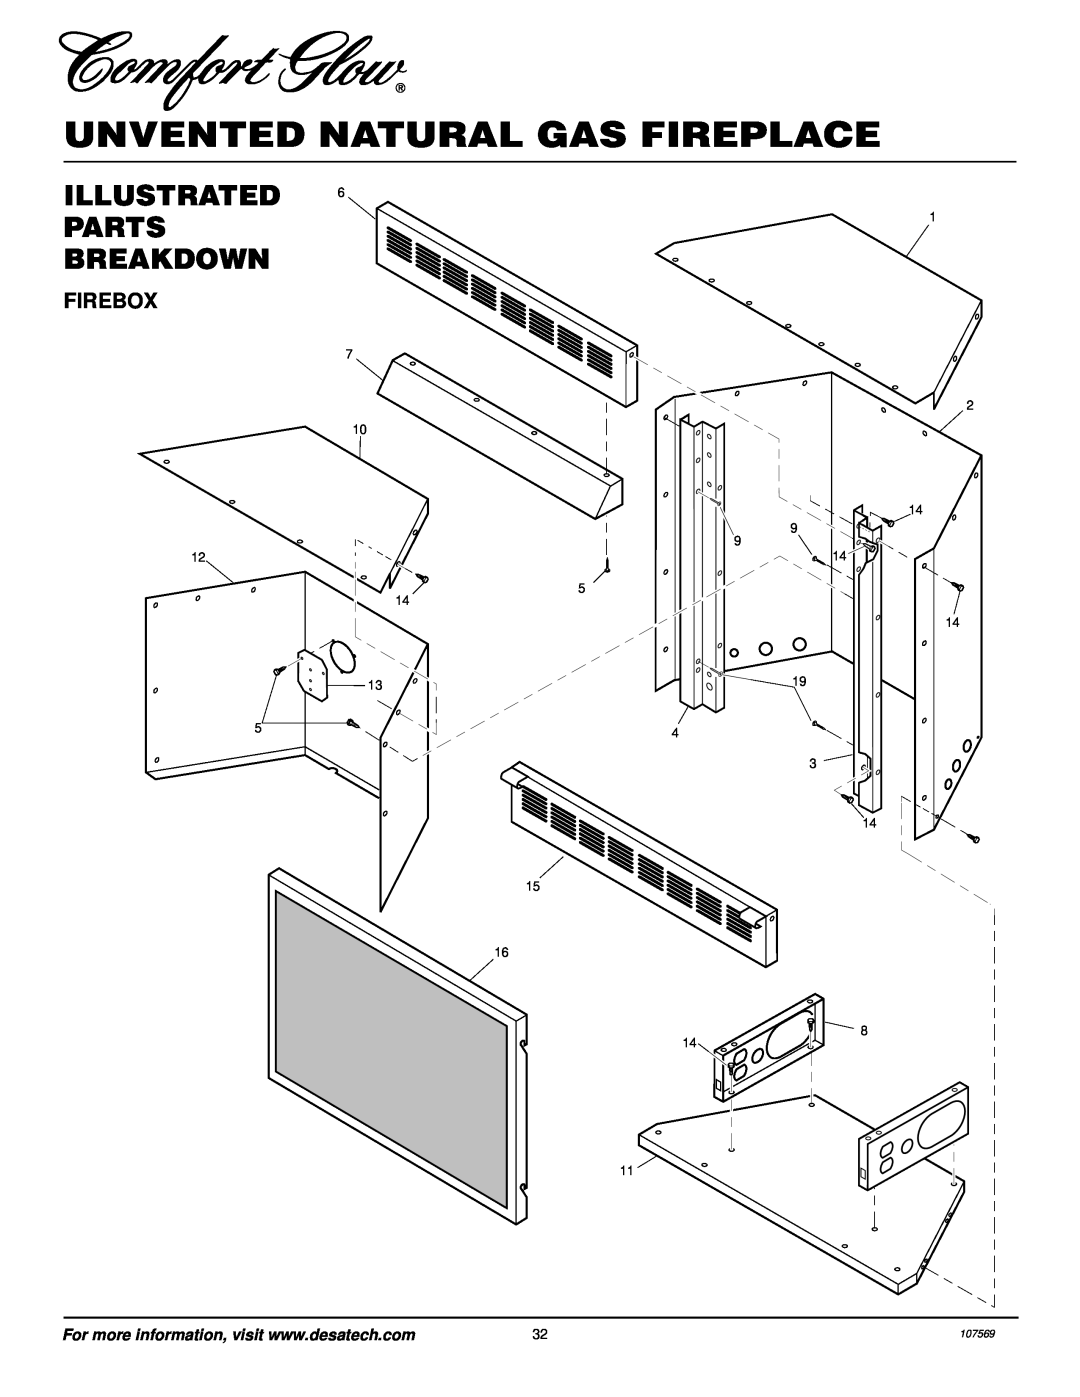 Desa CGEFP33NR installation manual Illustrated Parts Breakdown, Firebox, Unvented Natural Gas Fireplace, 107569 